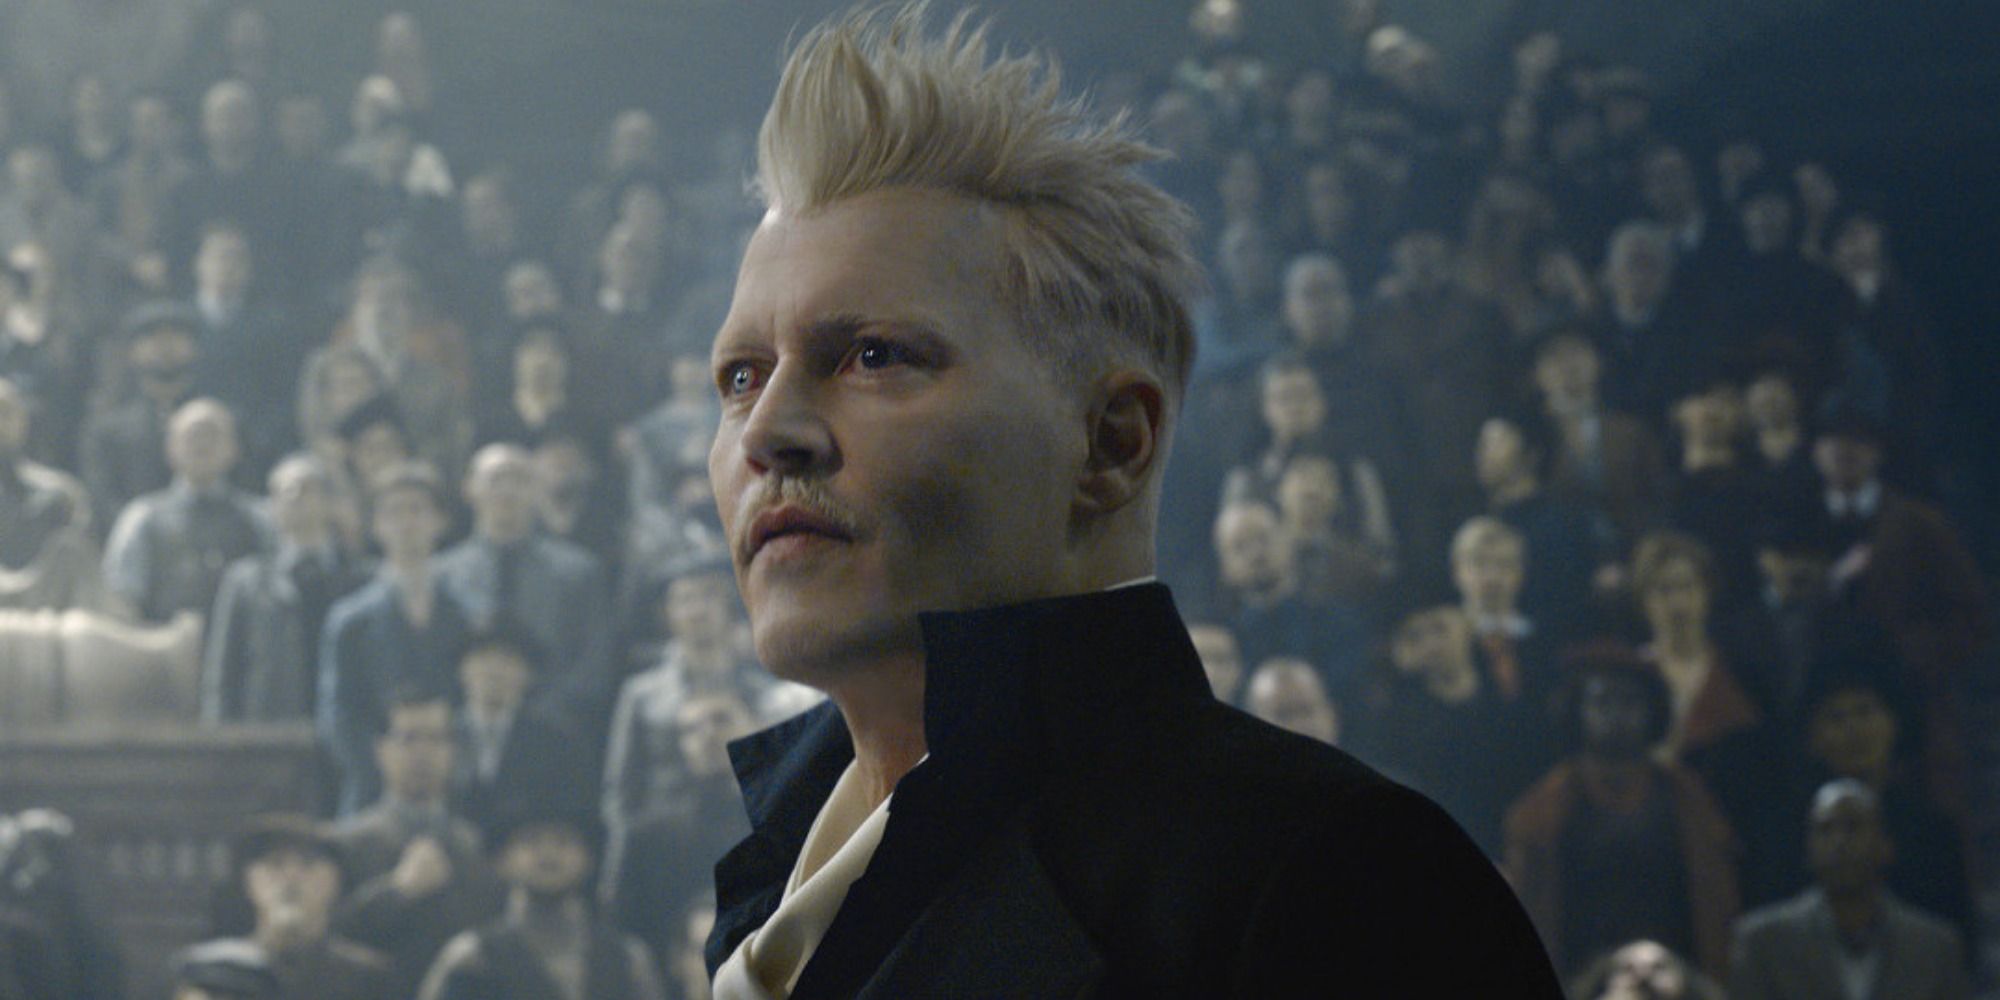 Gellert Grindelwald rallying his followers in Fantastic Beasts: The Crimes of Grindelwald